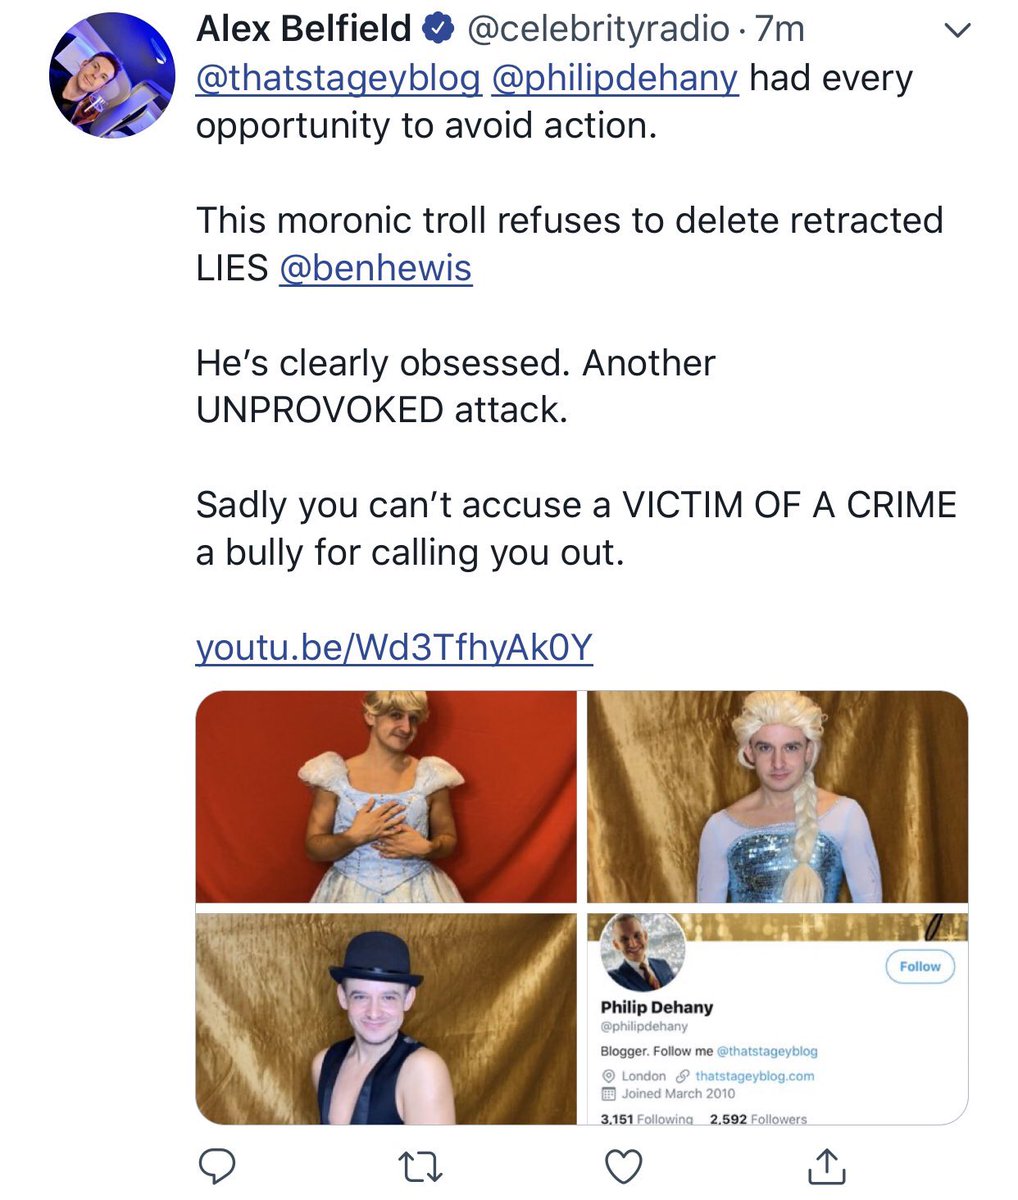 Alex Belfield then posts a modified tweet on  @celebrityradio in which he calls me a “moronic troll”, and that I am “obsessed”. He also deletes this tweet later that same day. He still uses the three photos of me dressed in drag.